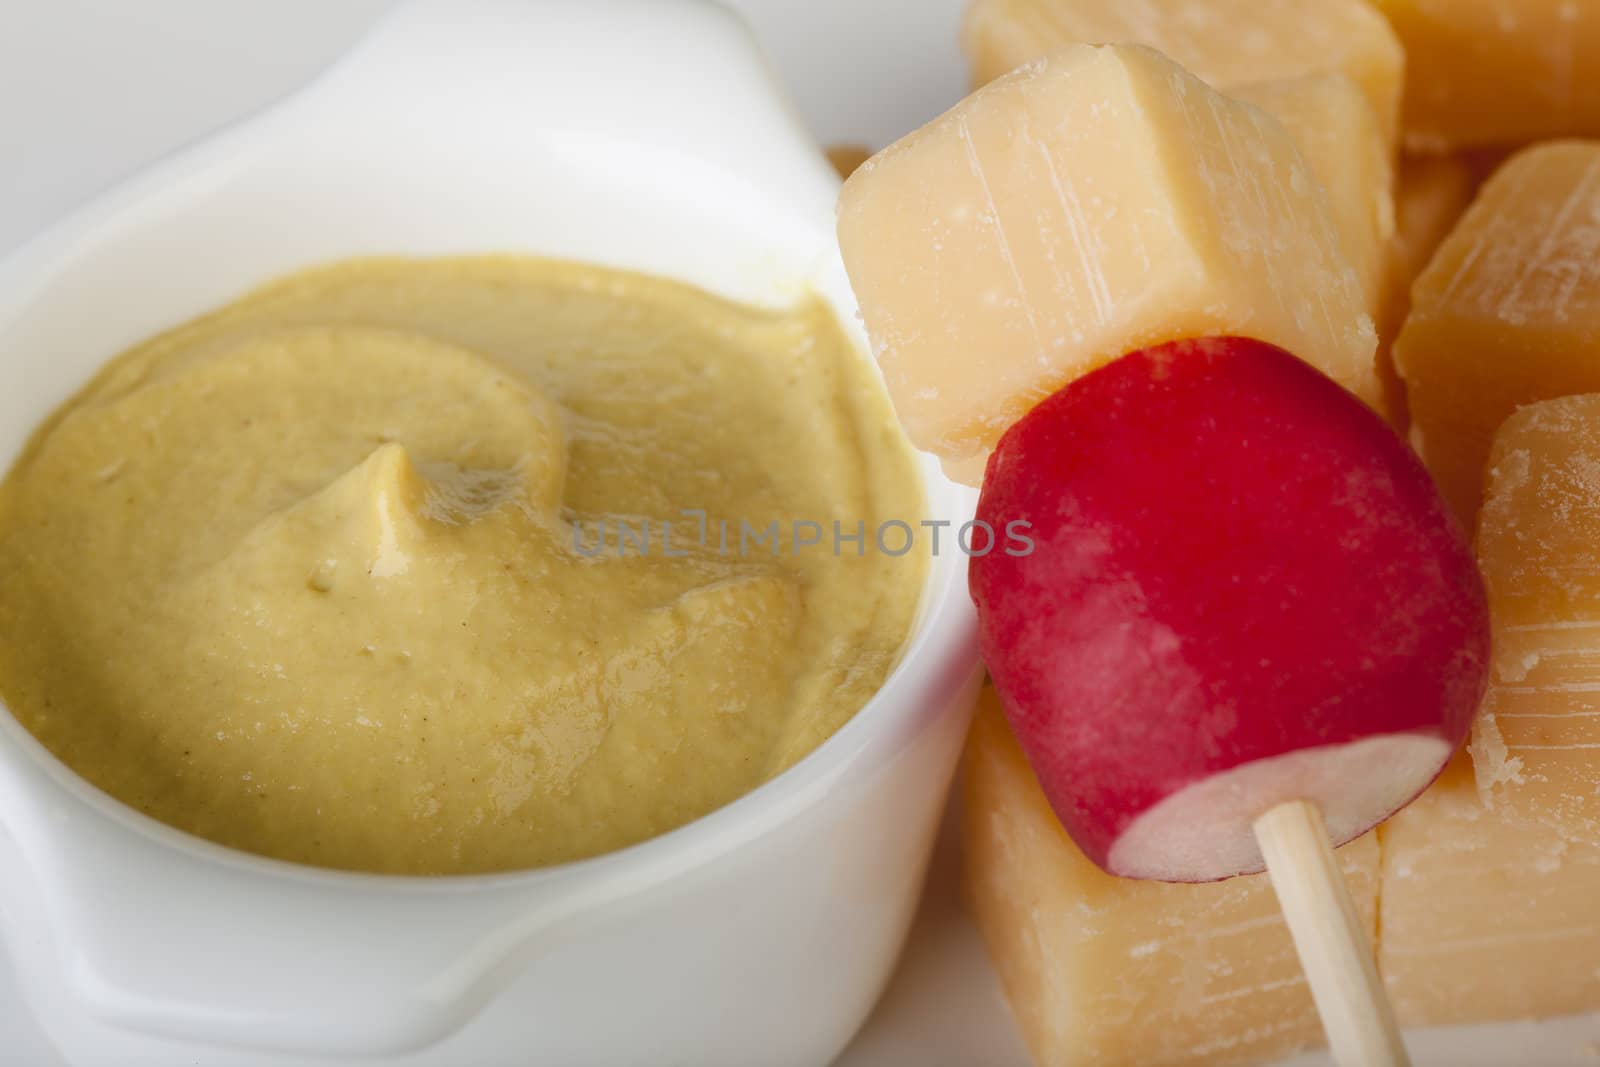 Appetizer of Dutch cheese cube and radish with mustard dipping sauce.